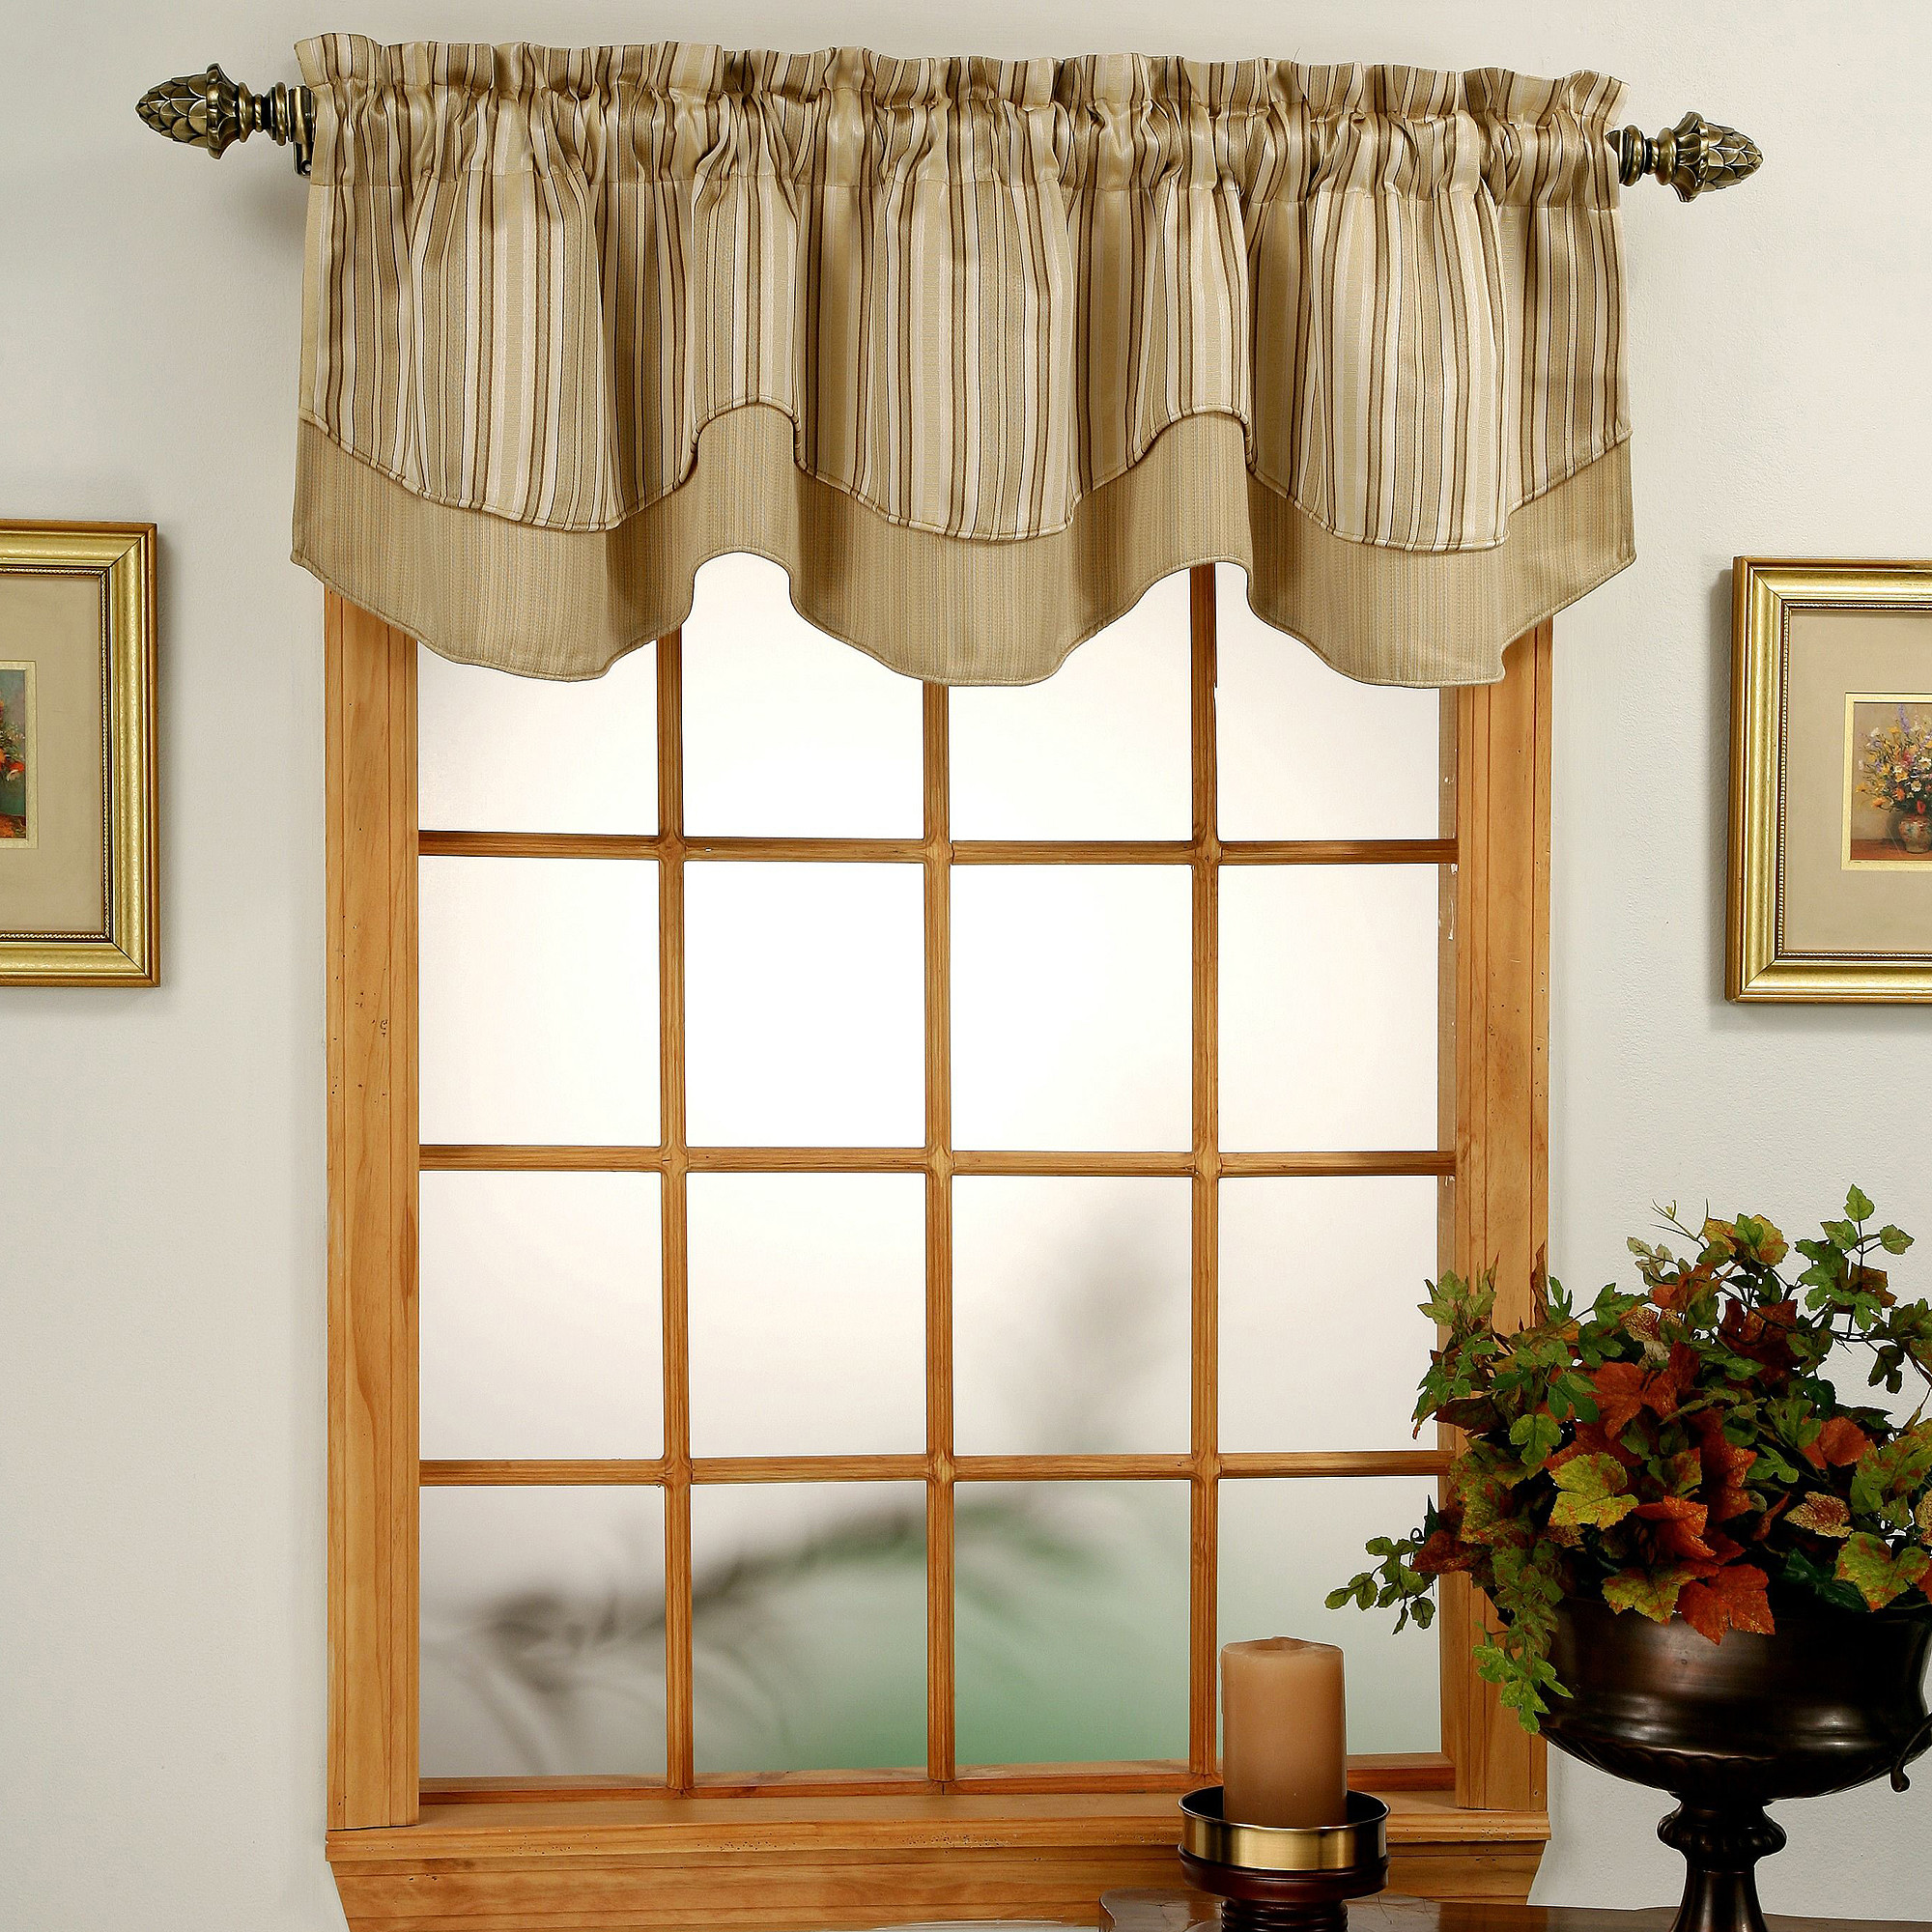 Window Valance Ideas Living Room
 Curtain Cute Living Room Valances For Your Home